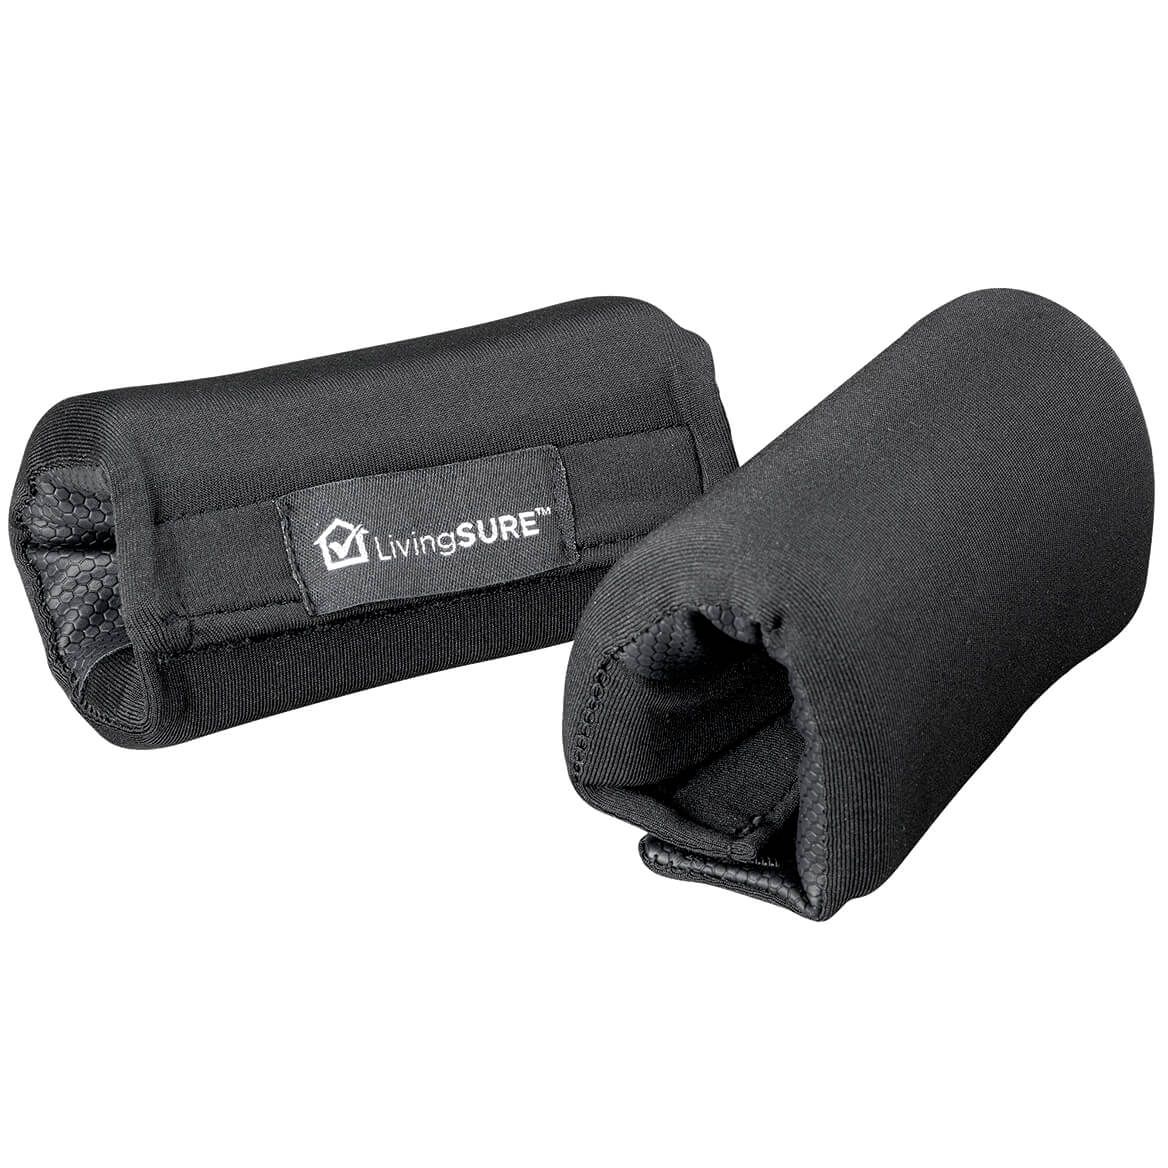 Comfort Hand Grips for Walkers by LivingSURE™, Set of 2 + '-' + 374523